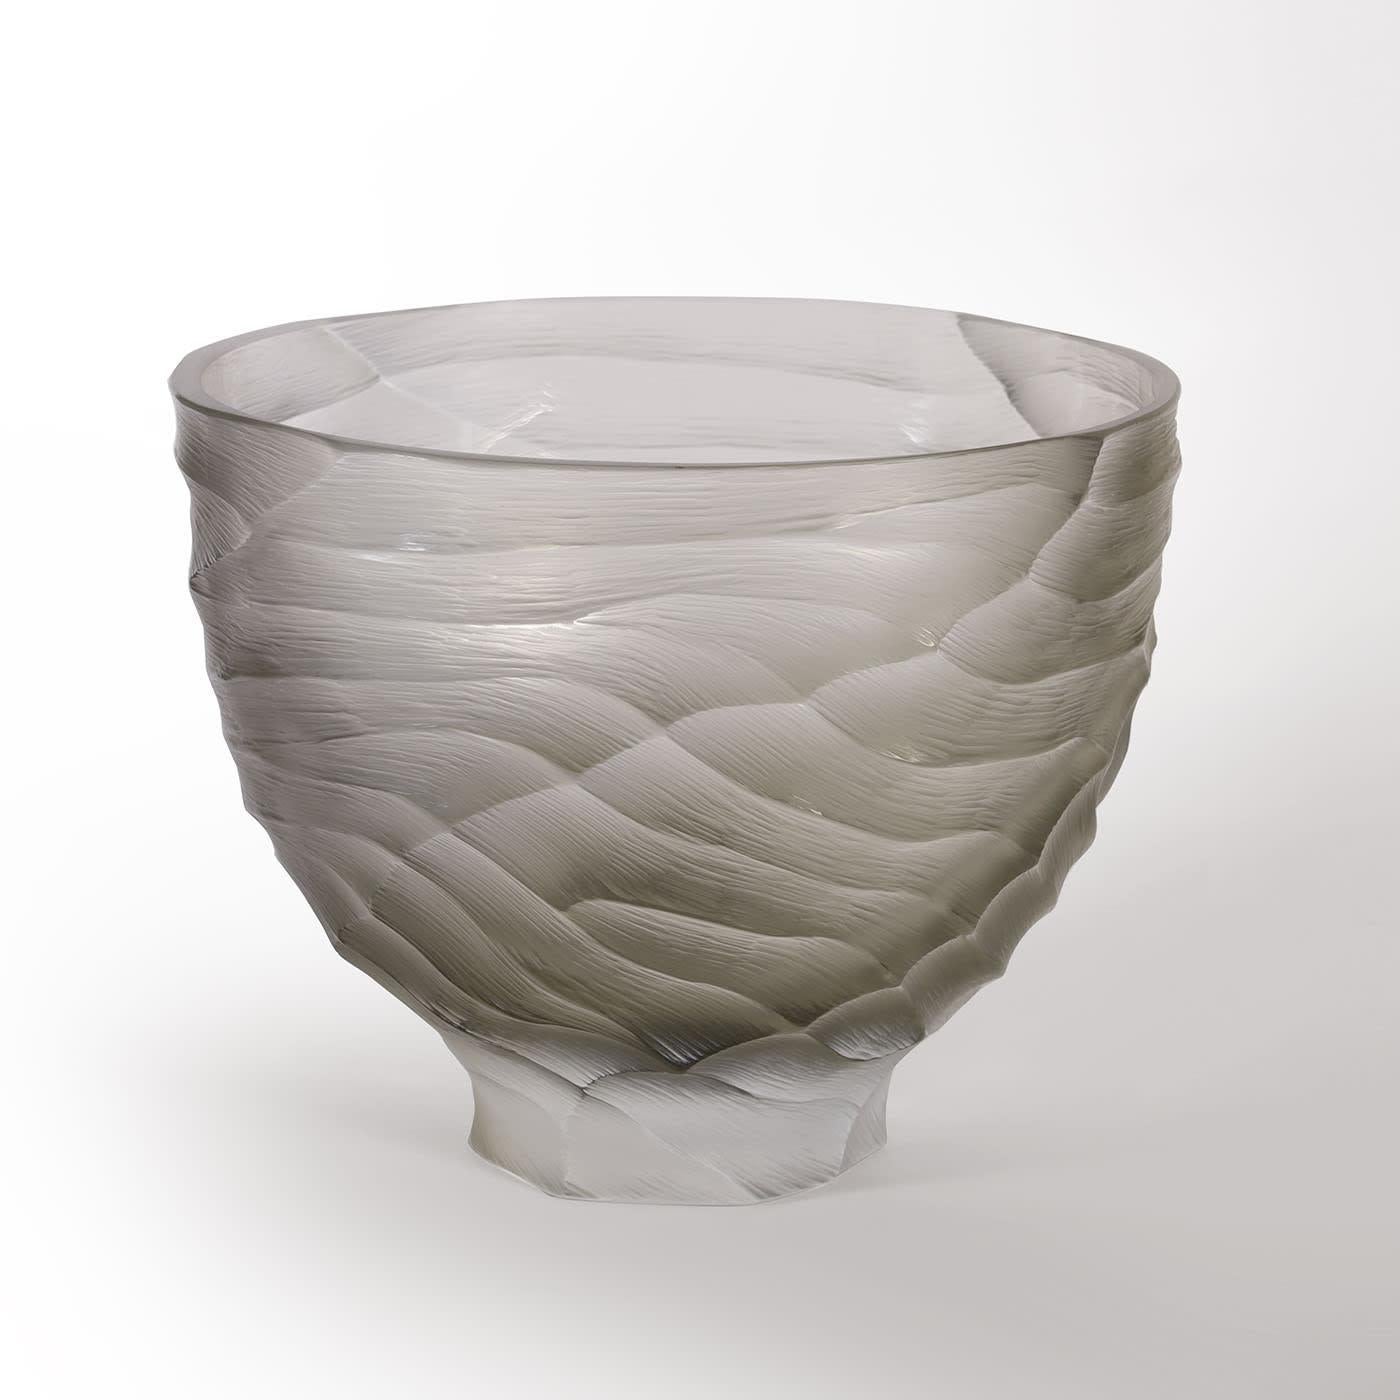 Discover this gray Murano glass handmade wet ground bowl produced by Ros Italia Interiors. Please, contact the Concierge service for further information.